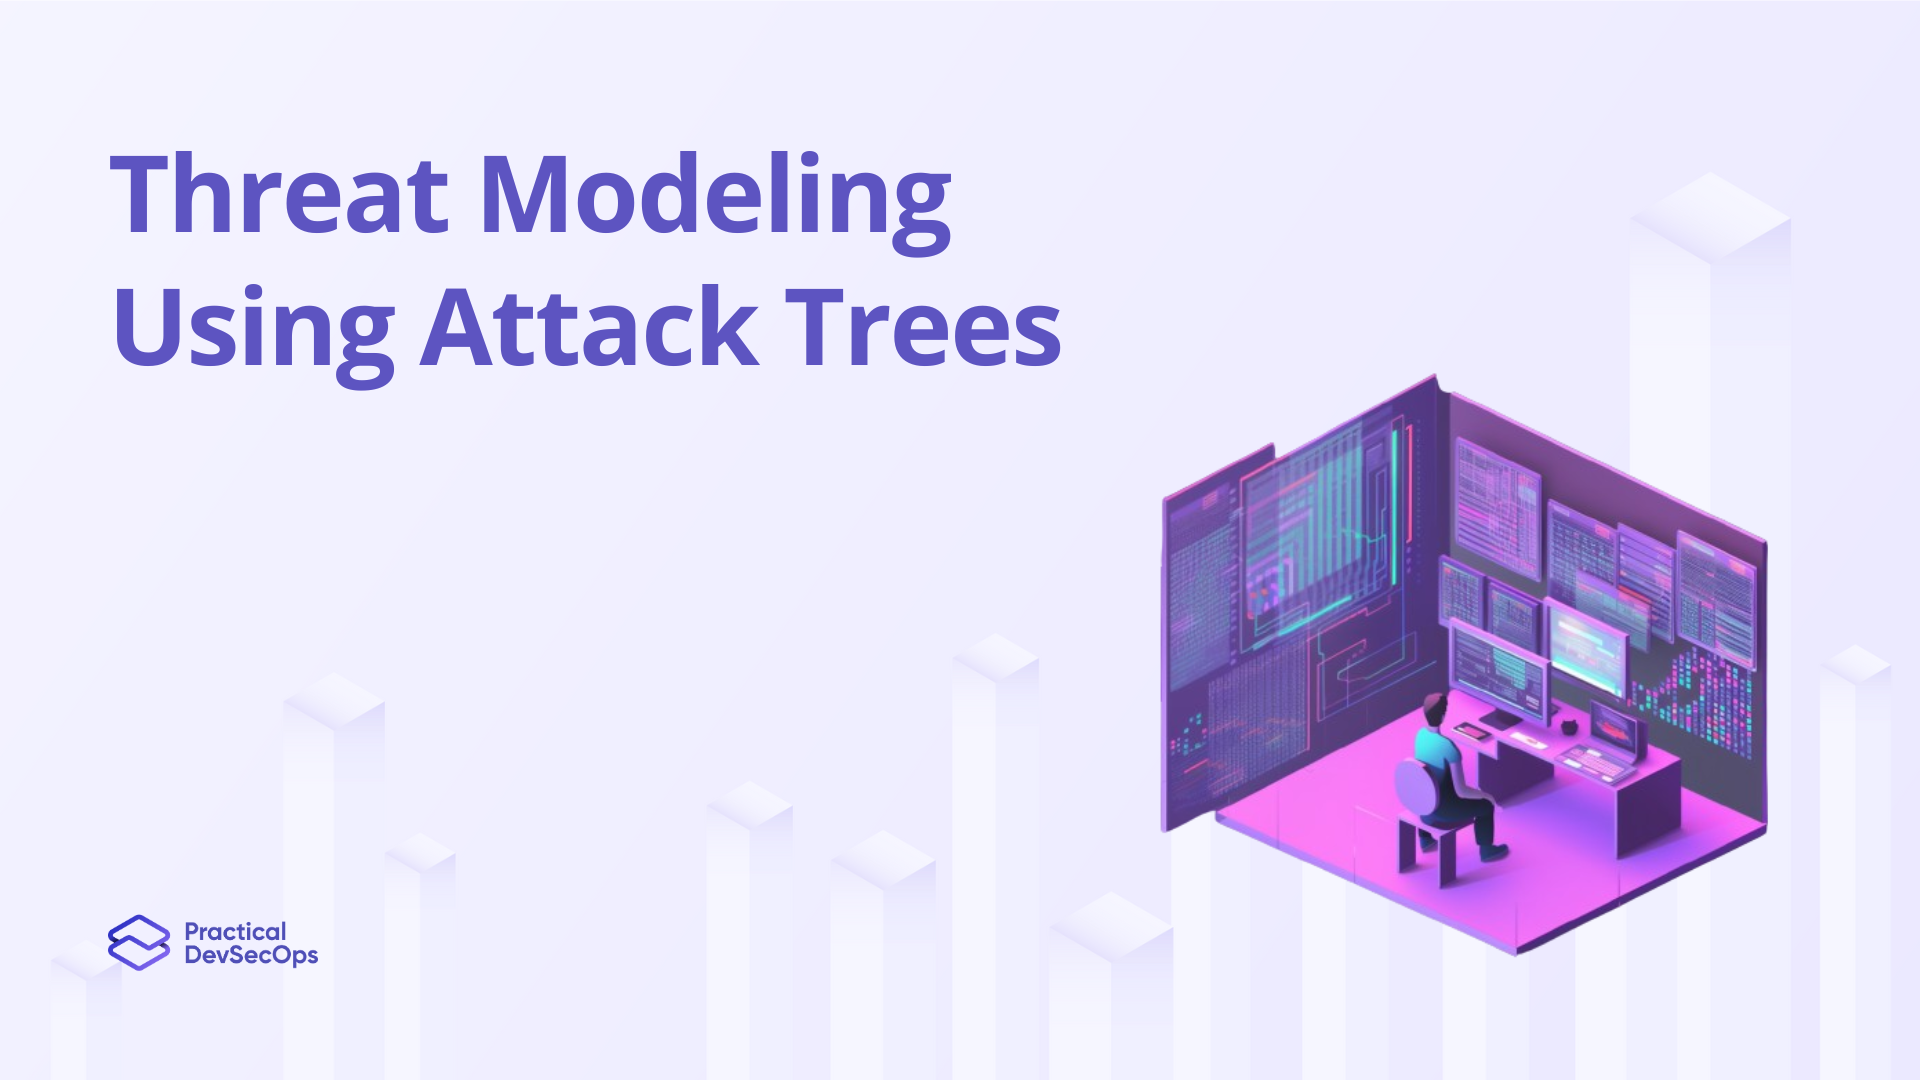 Guide to Threat Modeling using Attack Trees